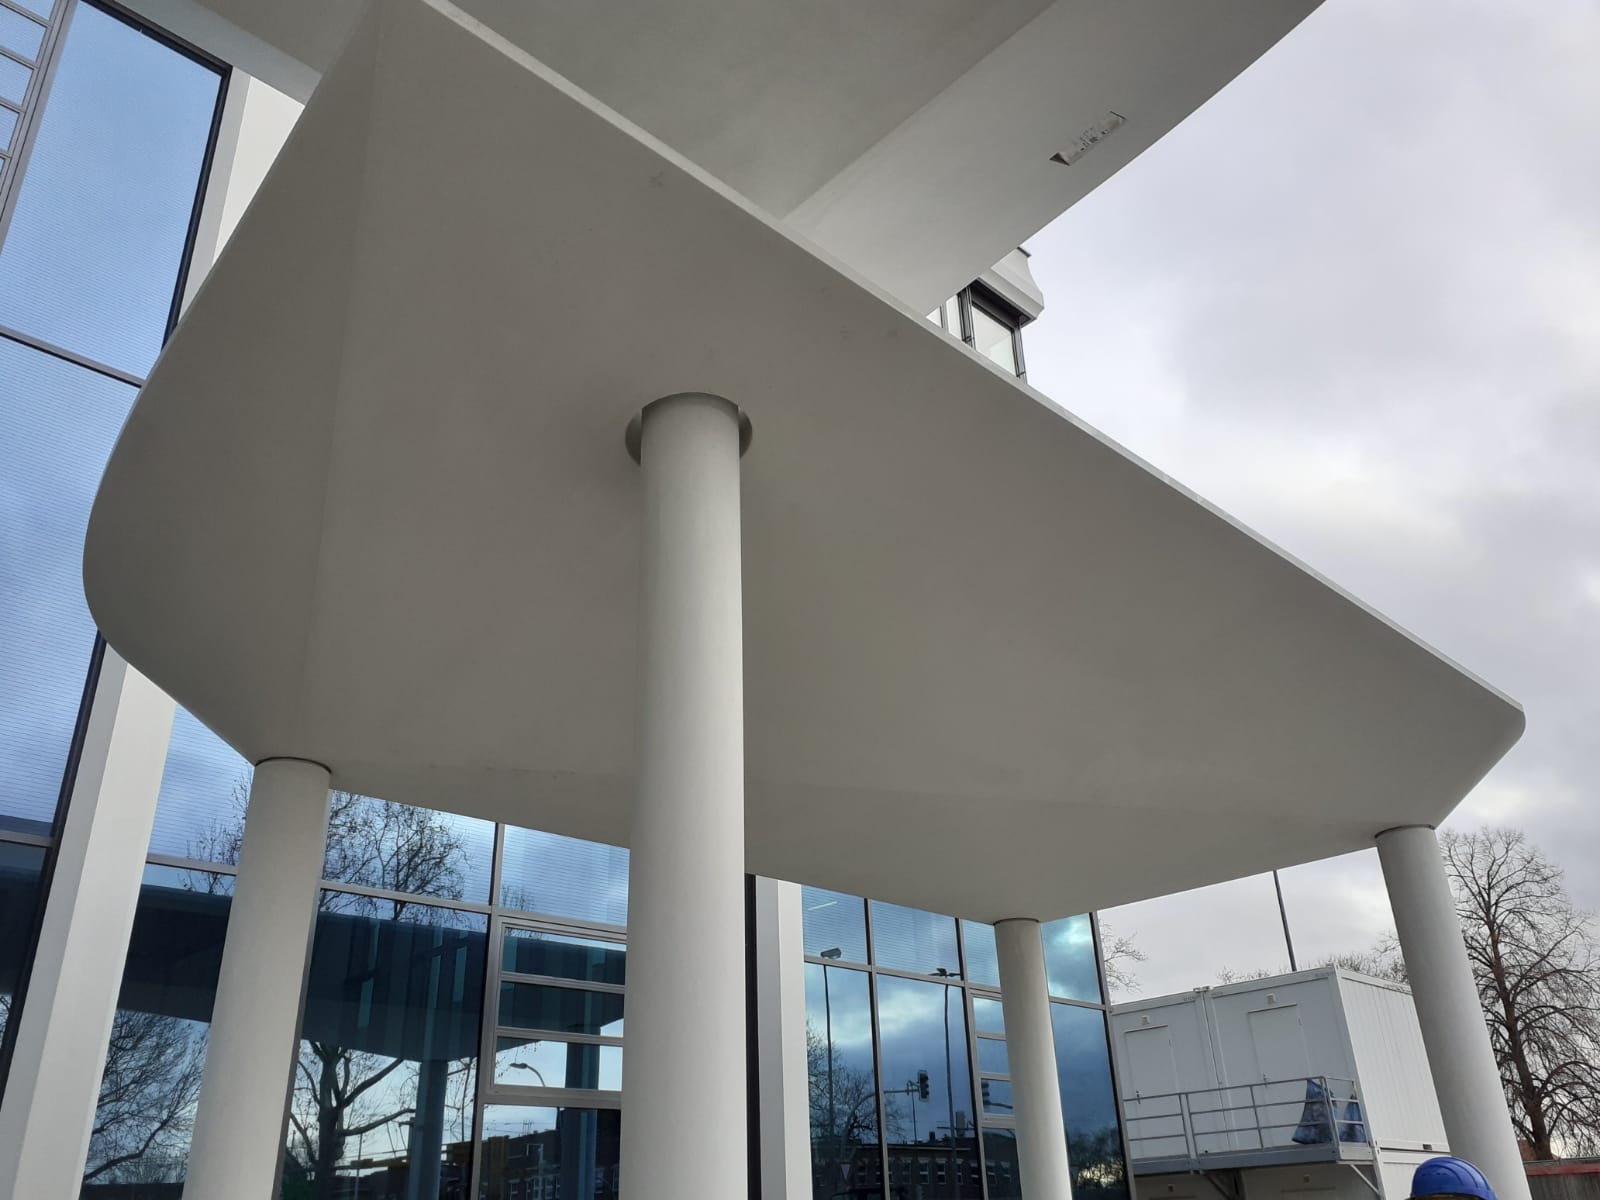 Prefab canopy element for the entrance to the Heidelberg head office.